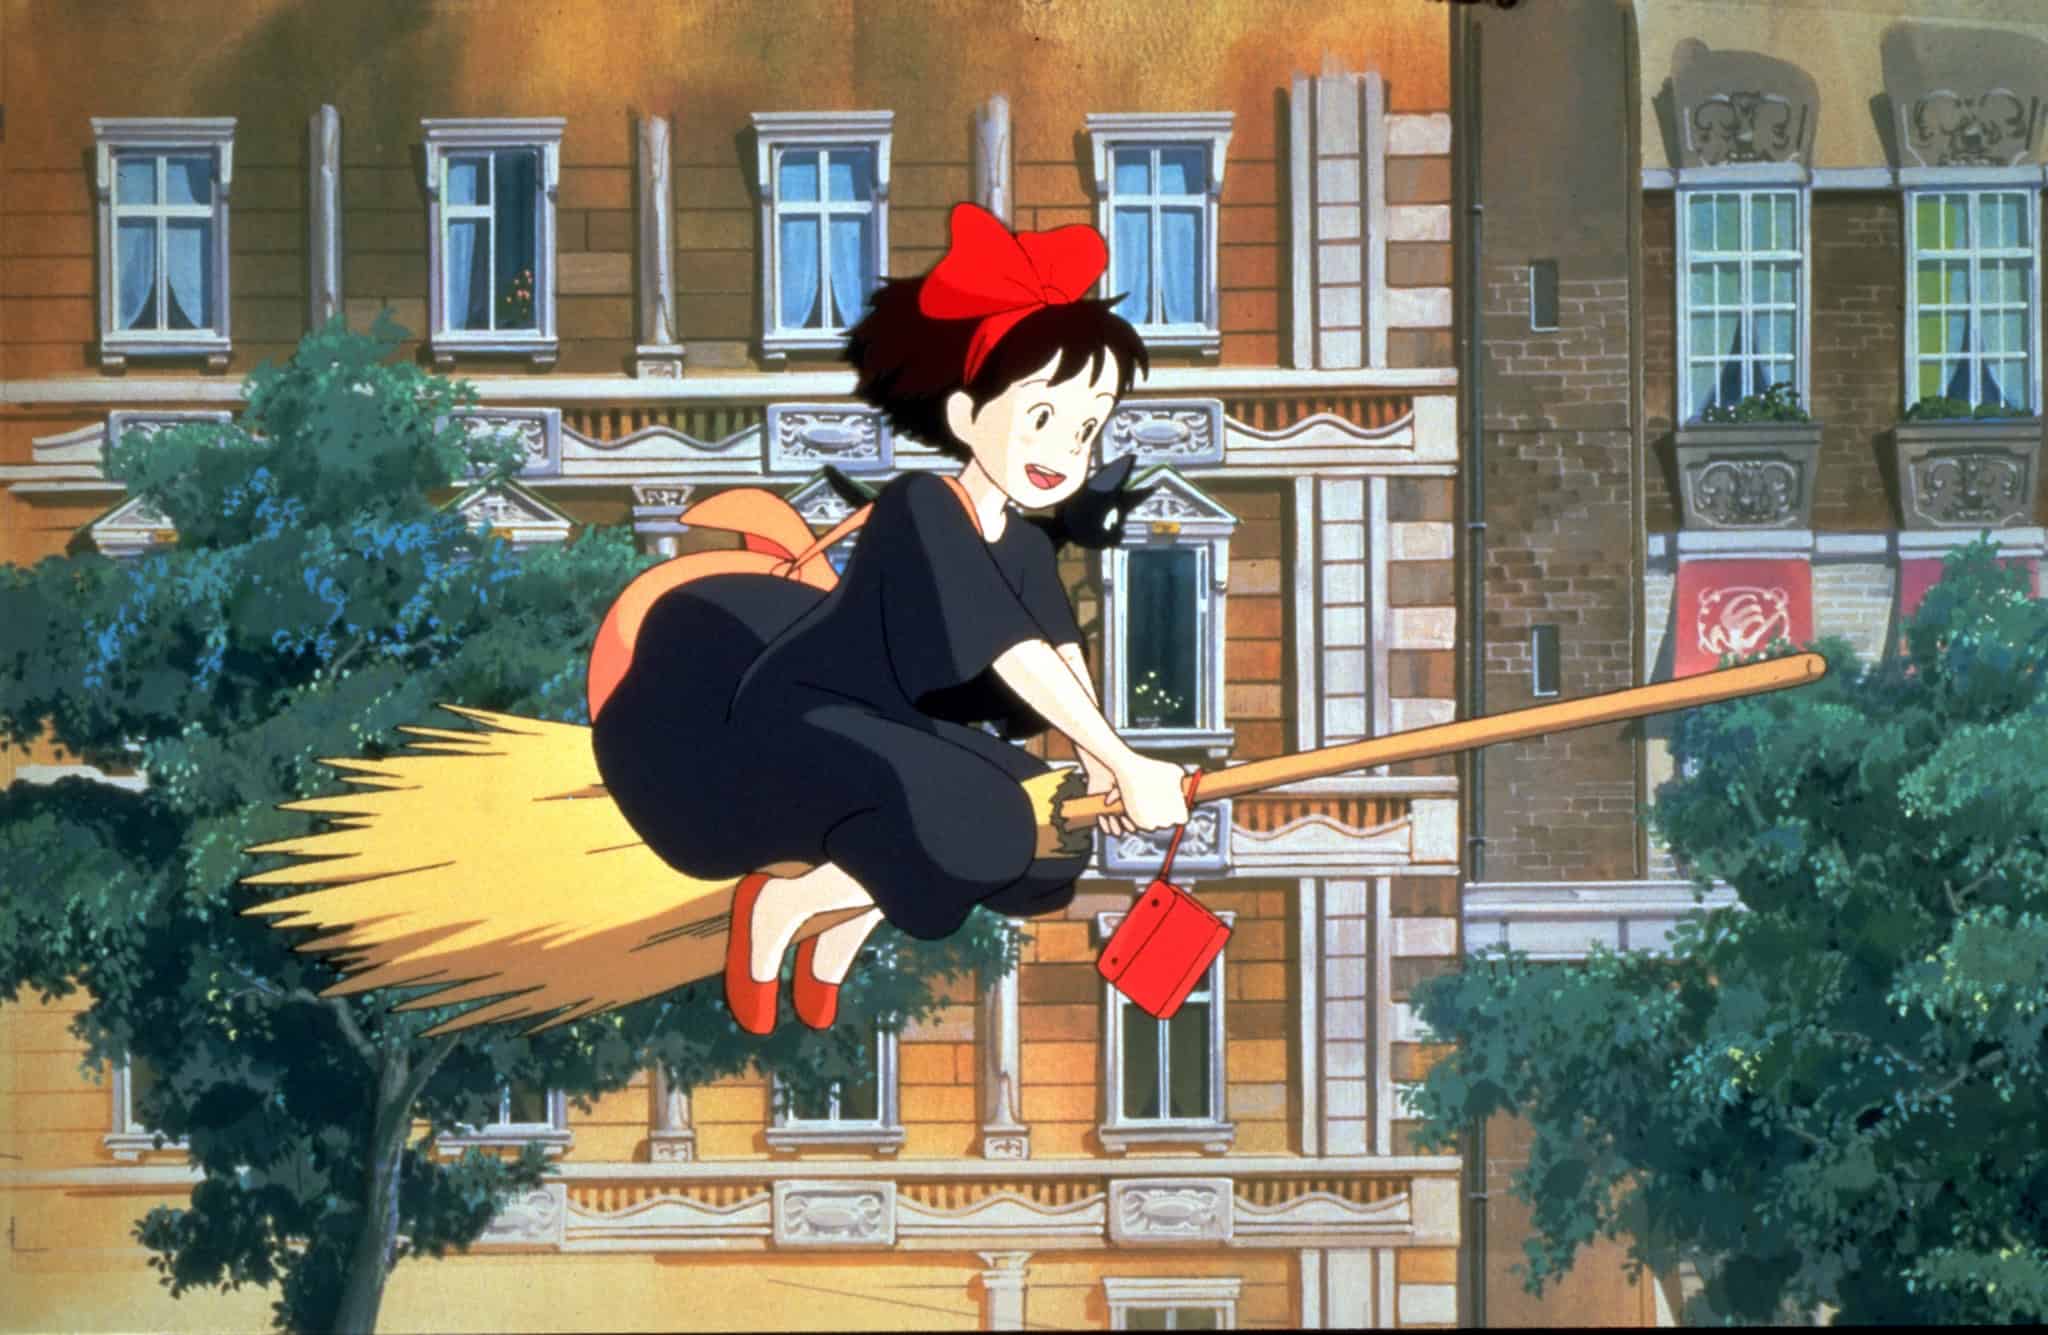 An animated young witch rides through the city on a broom in this image from Studio Ghibli.